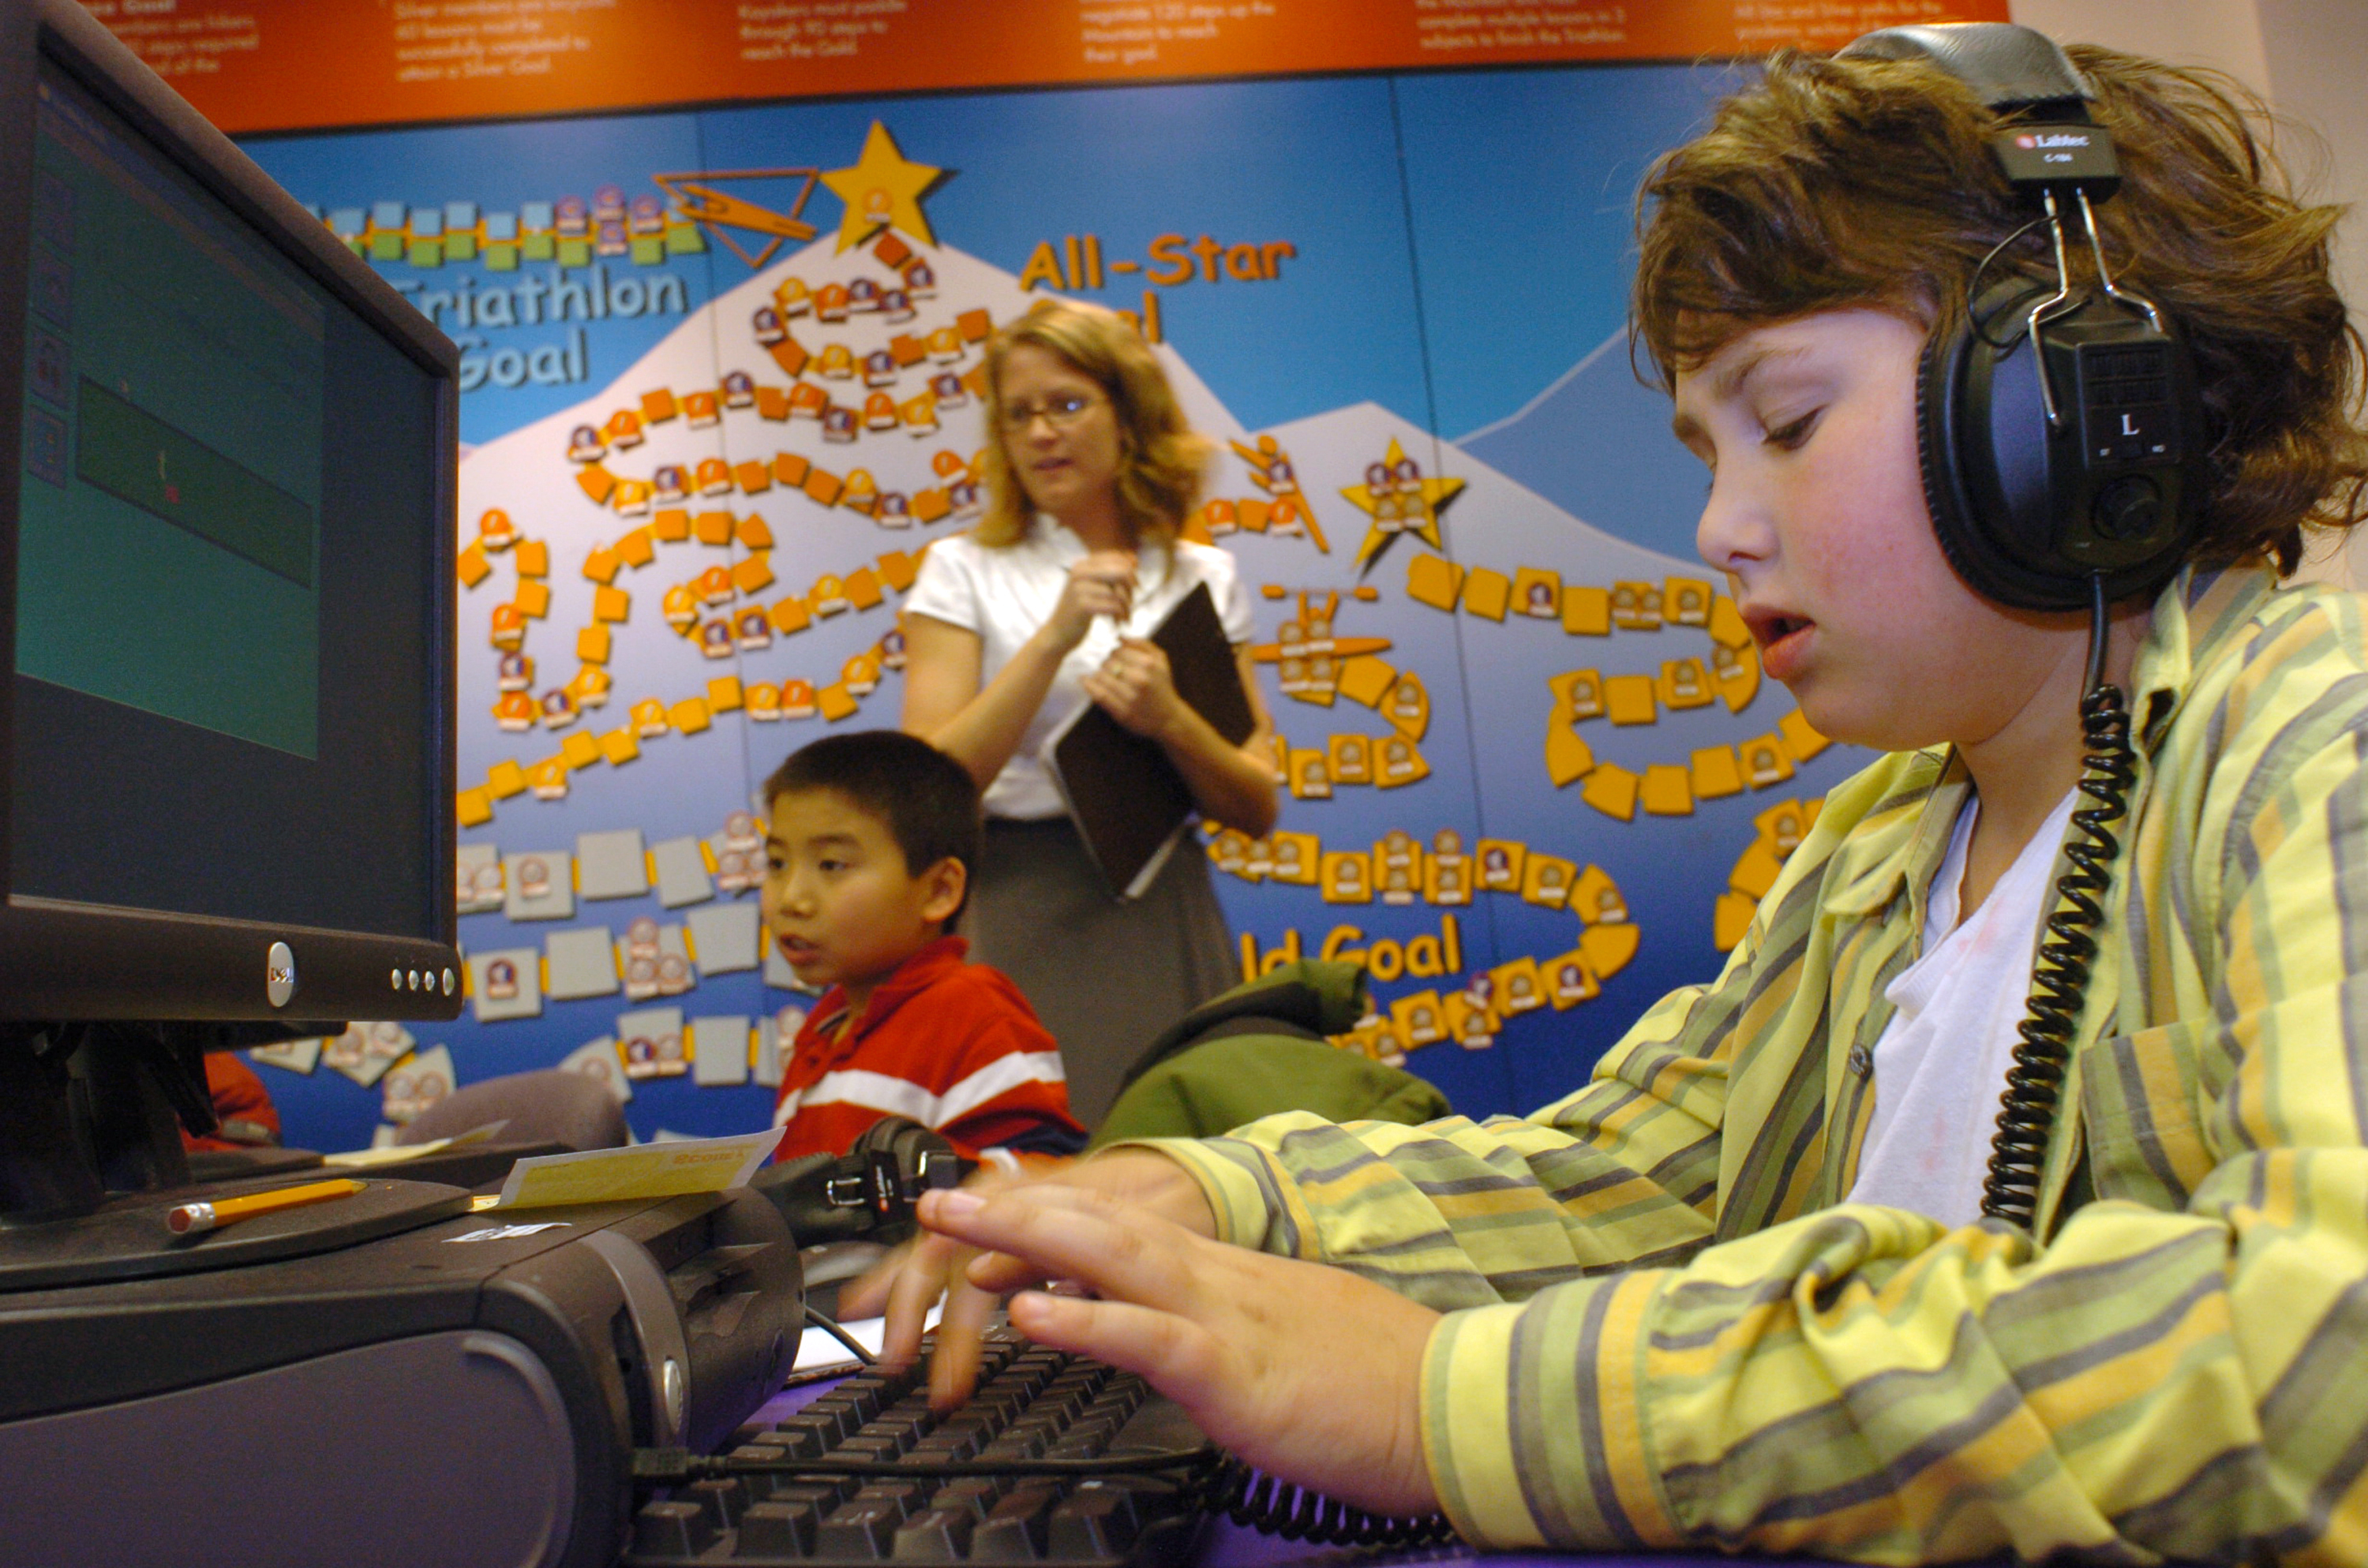 A fifth-grader works at a computer during an after-school learning program. (Farah Nosh/Getty Images)